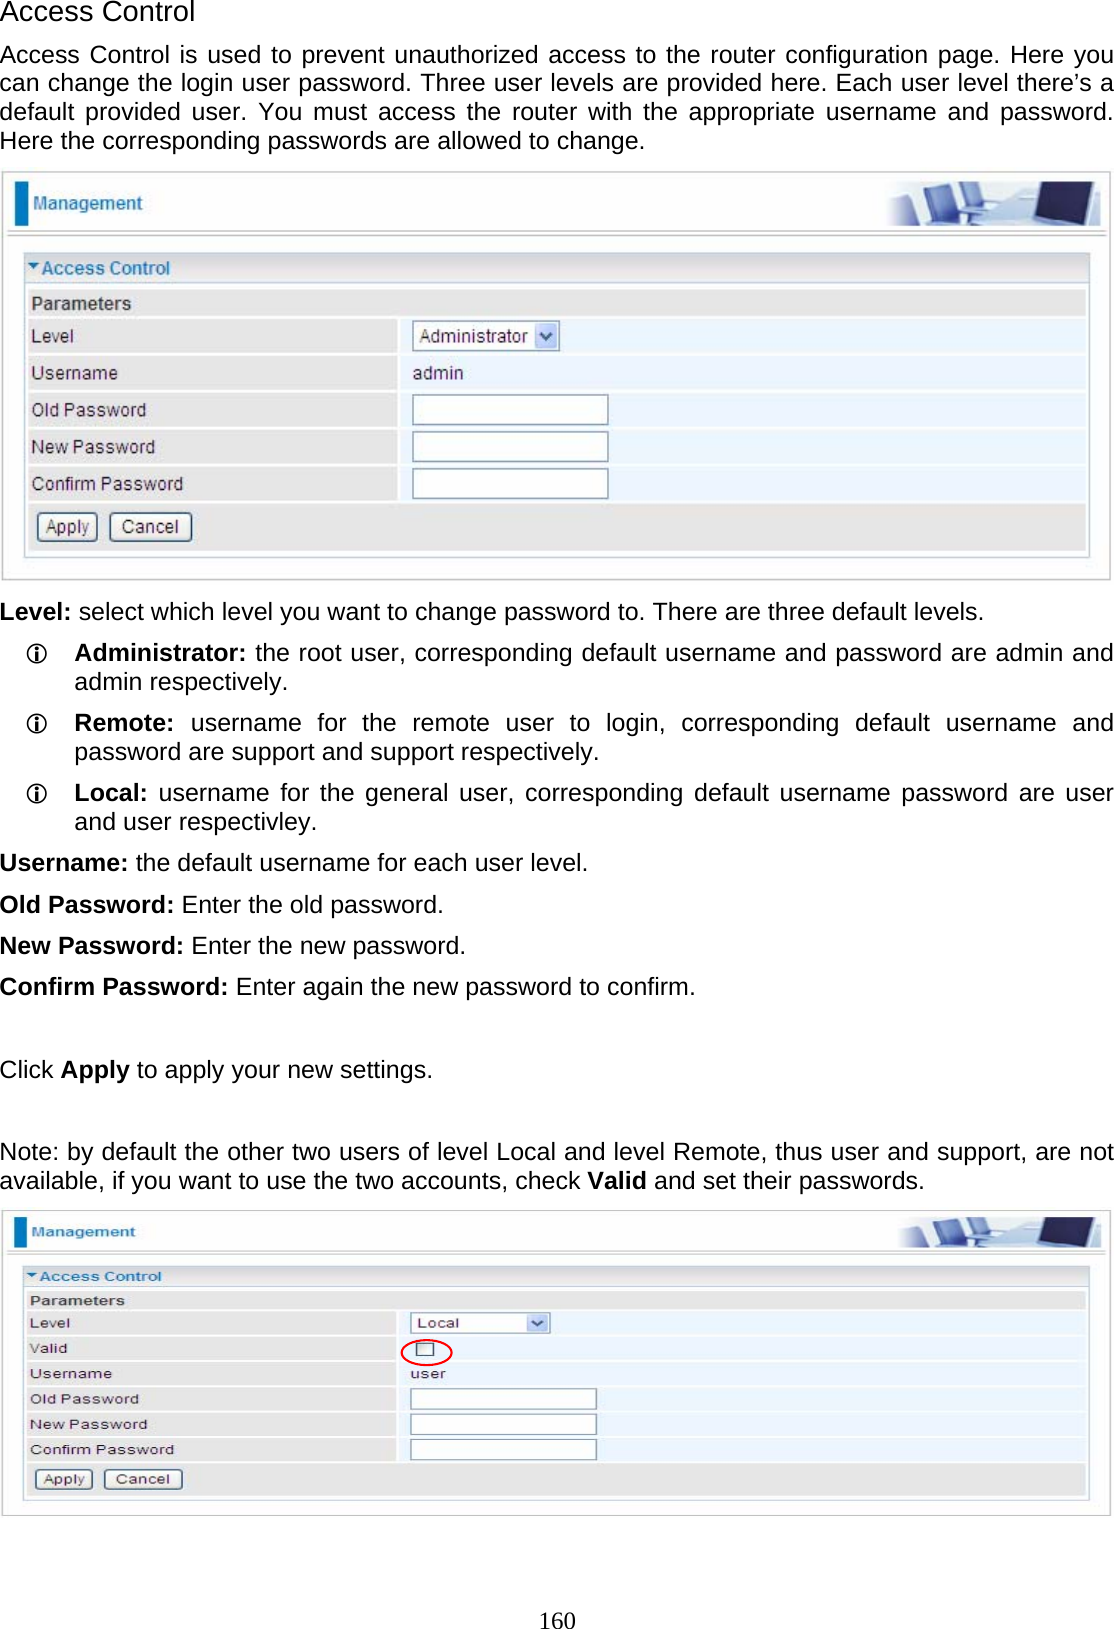 160 Access Control Access Control is used to prevent unauthorized access to the router configuration page. Here you can change the login user password. Three user levels are provided here. Each user level there’s a default provided user. You must access the router with the appropriate username and password. Here the corresponding passwords are allowed to change.   Level: select which level you want to change password to. There are three default levels. L Administrator: the root user, corresponding default username and password are admin and admin respectively. L Remote:  username for the remote user to login, corresponding default username and password are support and support respectively. L Local: username for the general user, corresponding default username password are user and user respectivley. Username: the default username for each user level. Old Password: Enter the old password. New Password: Enter the new password. Confirm Password: Enter again the new password to confirm.   Click Apply to apply your new settings.  Note: by default the other two users of level Local and level Remote, thus user and support, are not available, if you want to use the two accounts, check Valid and set their passwords.    